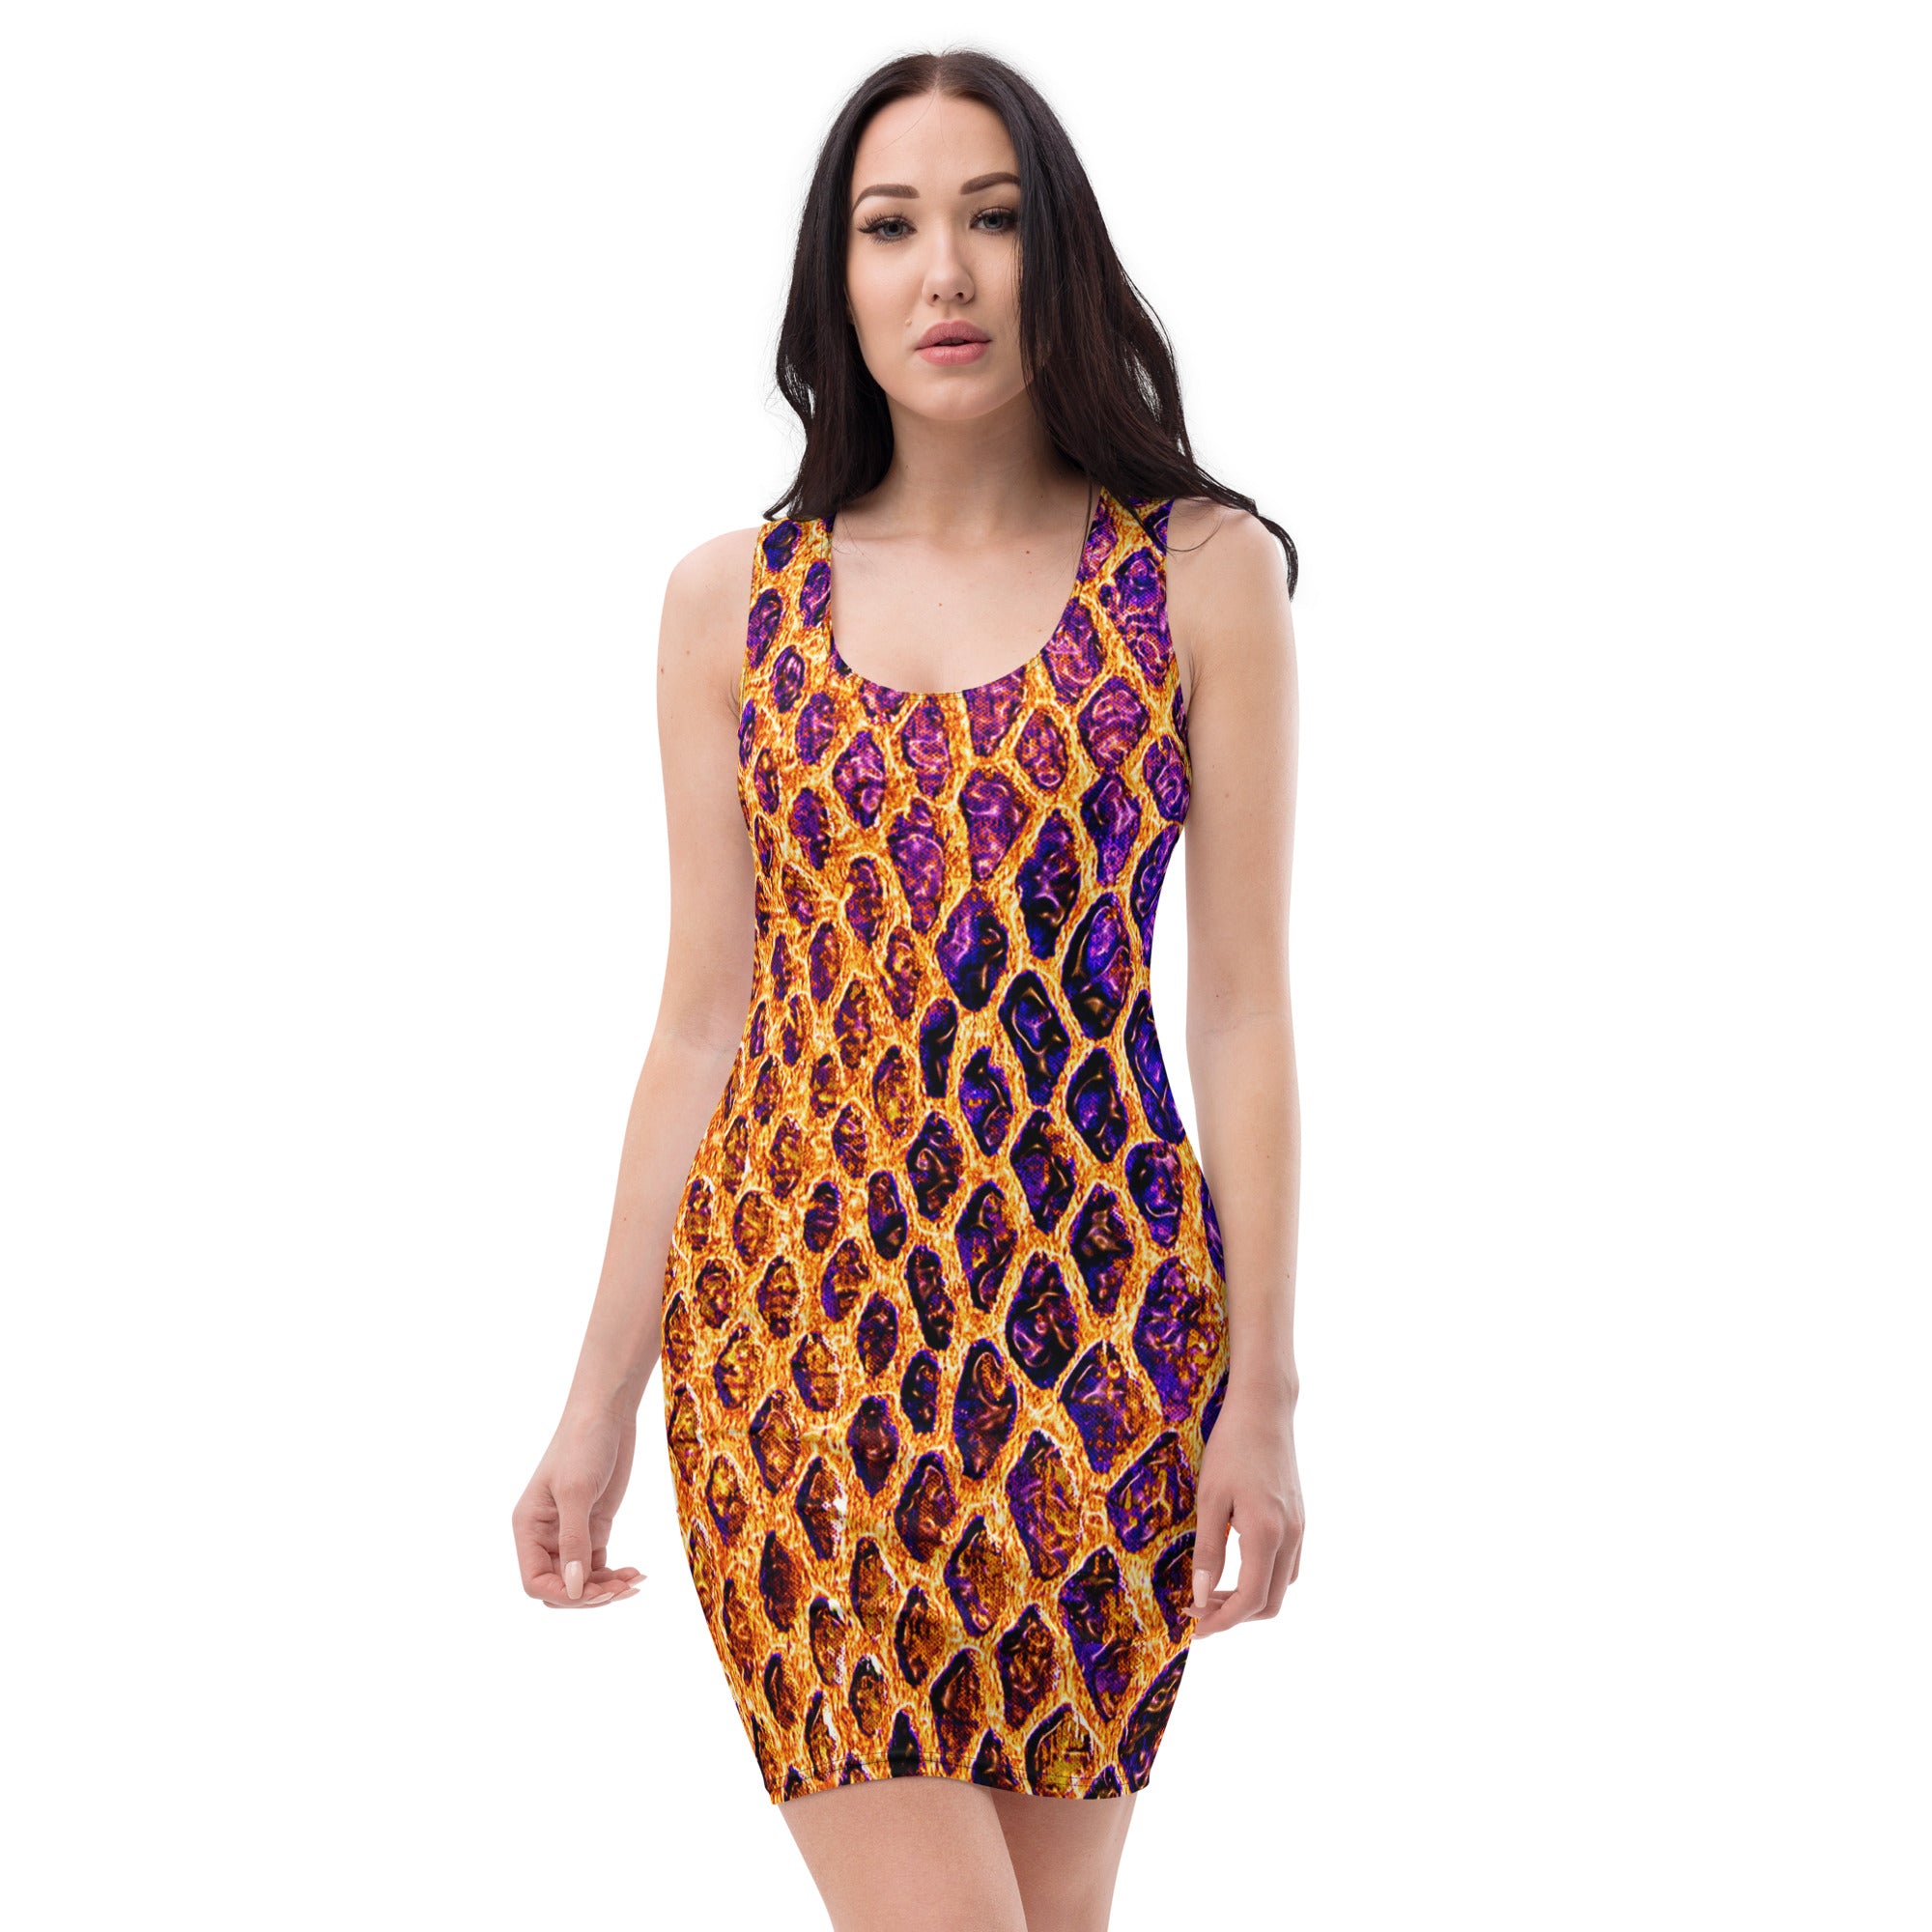 "Radiant Reptilian Charm: Colorful Snakeskin Sheen Fitted Dress", lioness-love